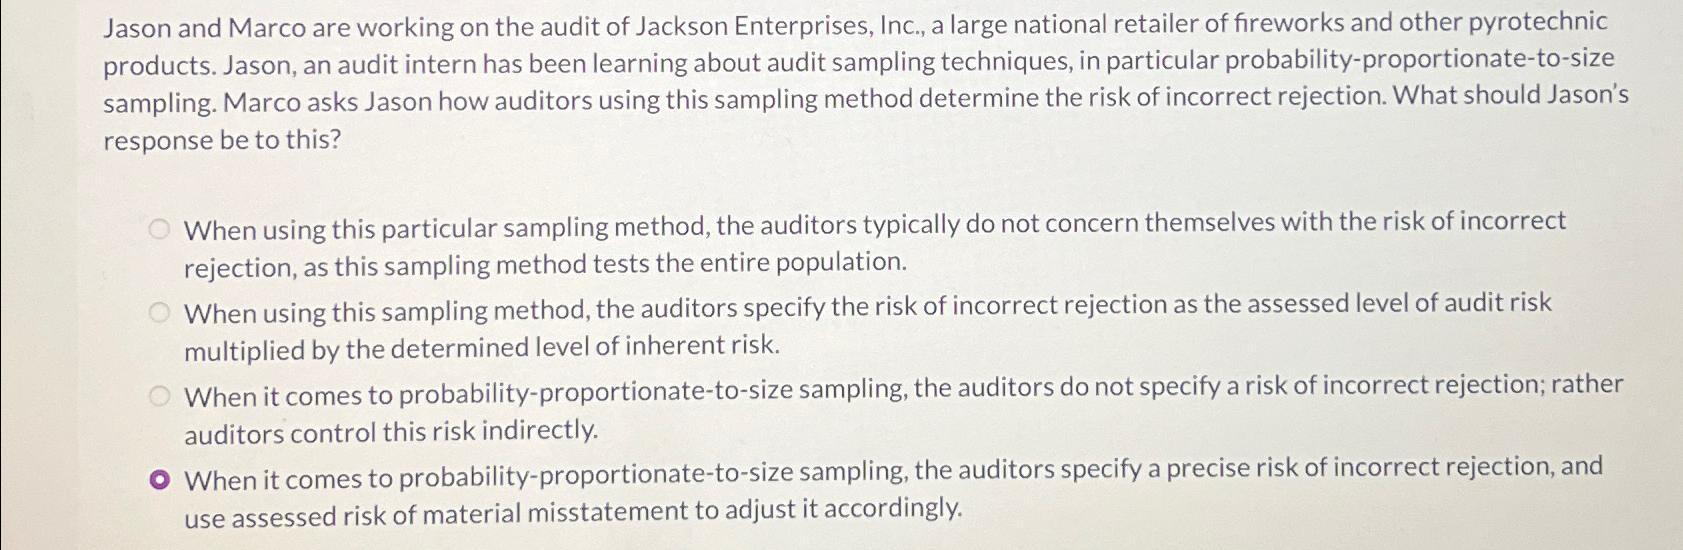 Jason and Marco are working on the audit of Jackson Enterprises, Inc., a large national retailer of fireworks